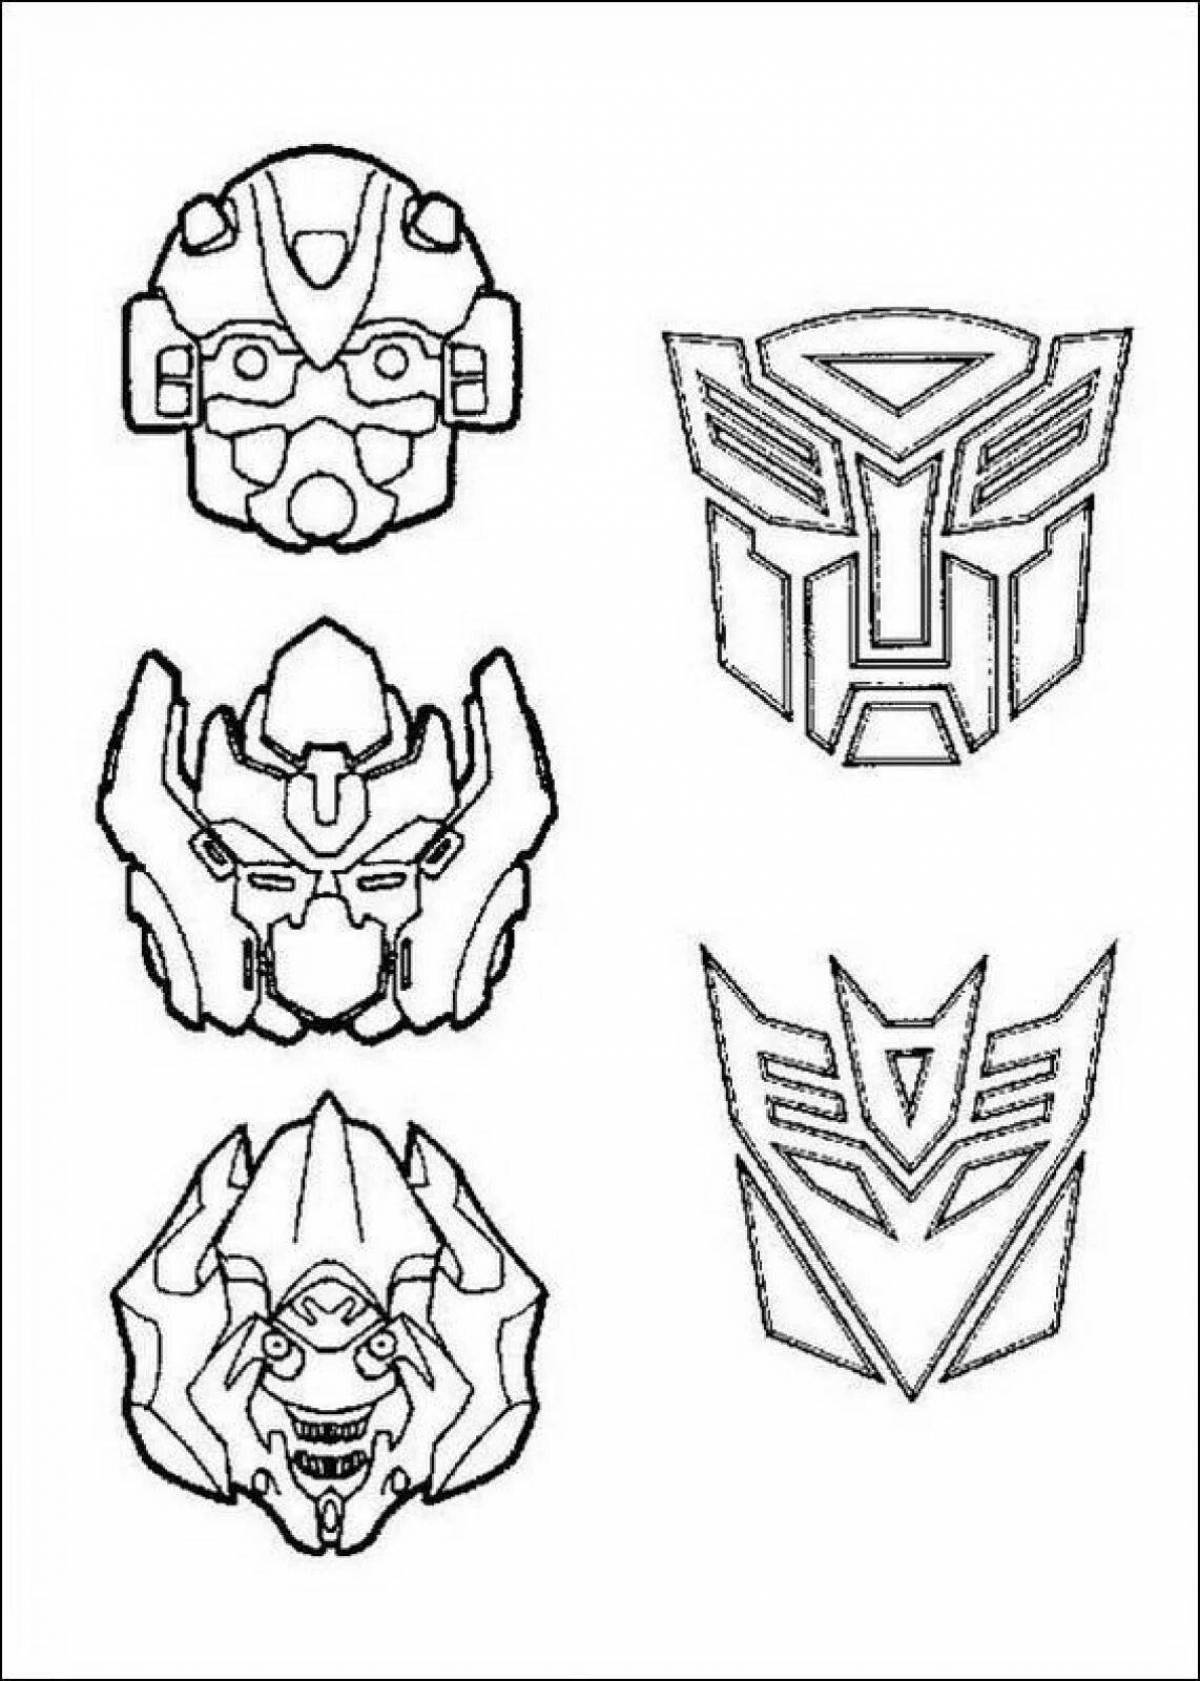 Fun coloring of Autobots